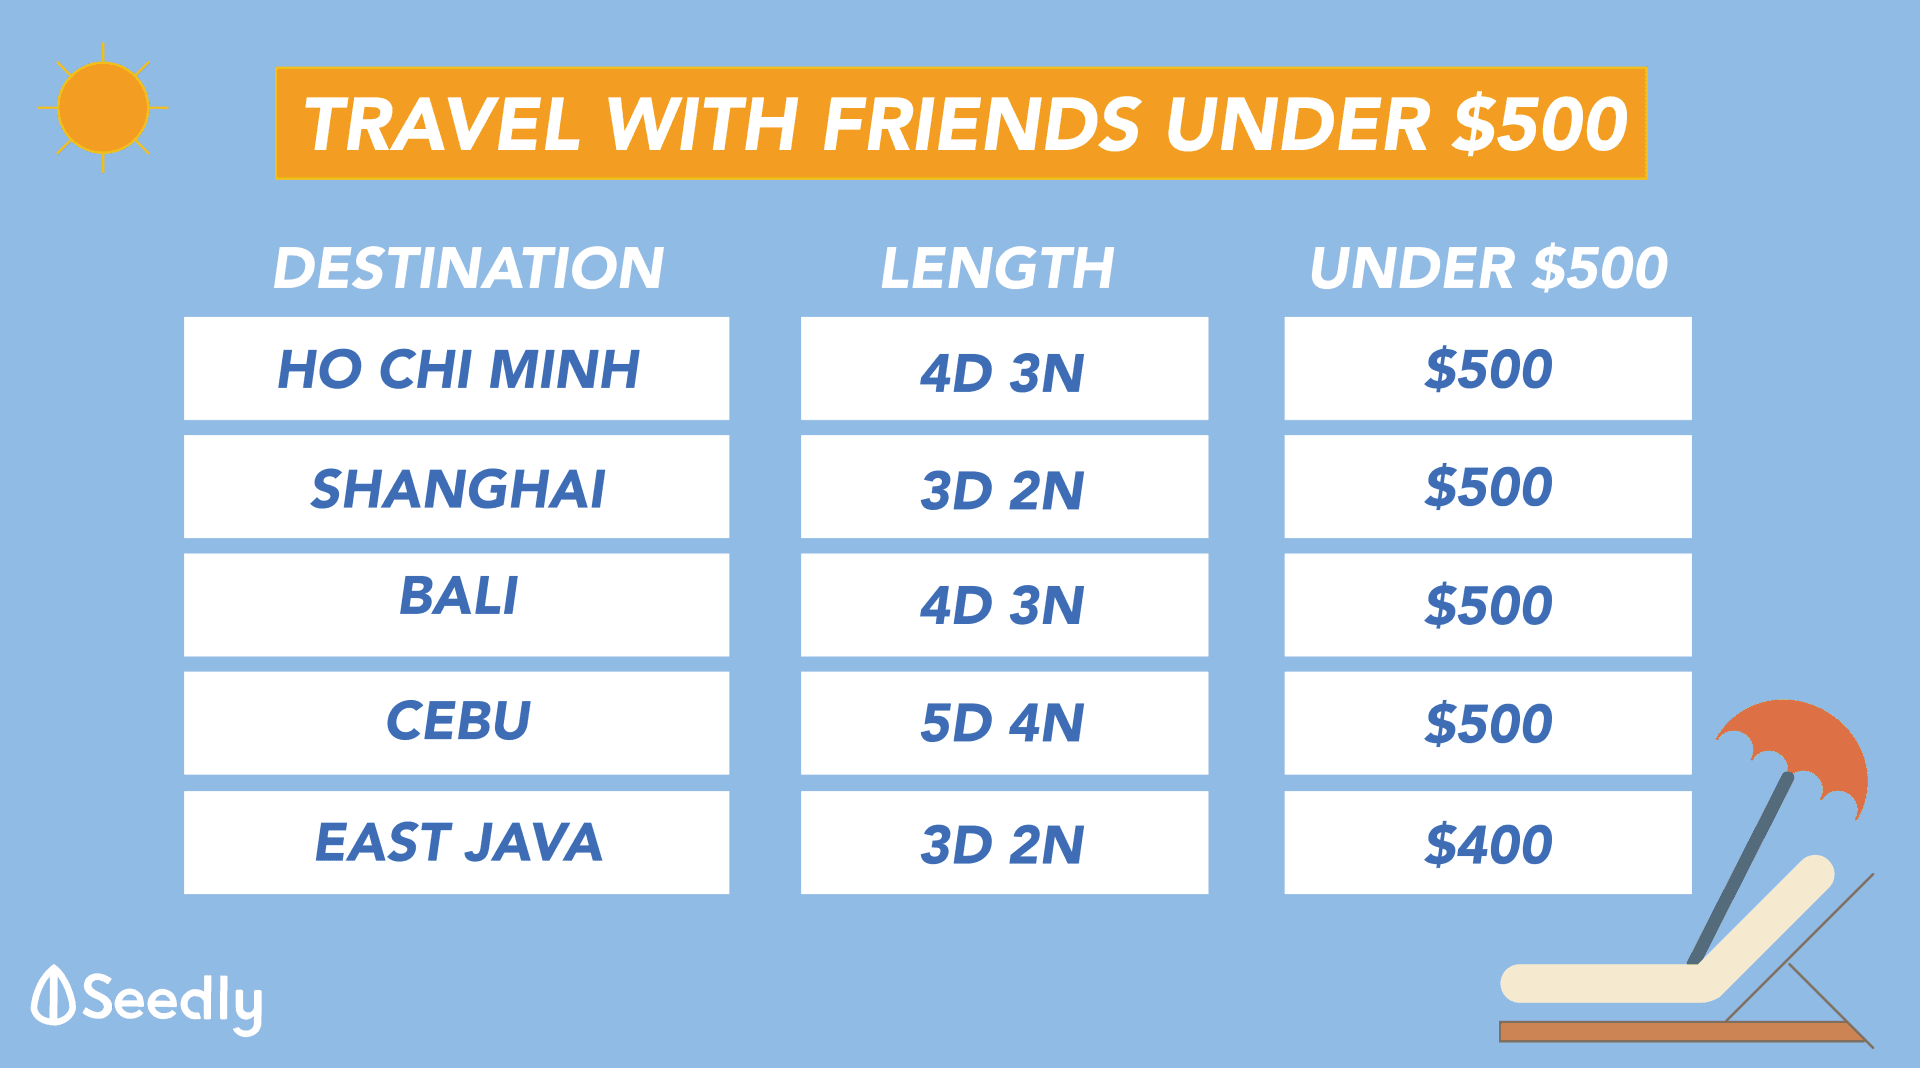 Travel Destinations For Friends On A Budget Under $500: Based On Real Reviews